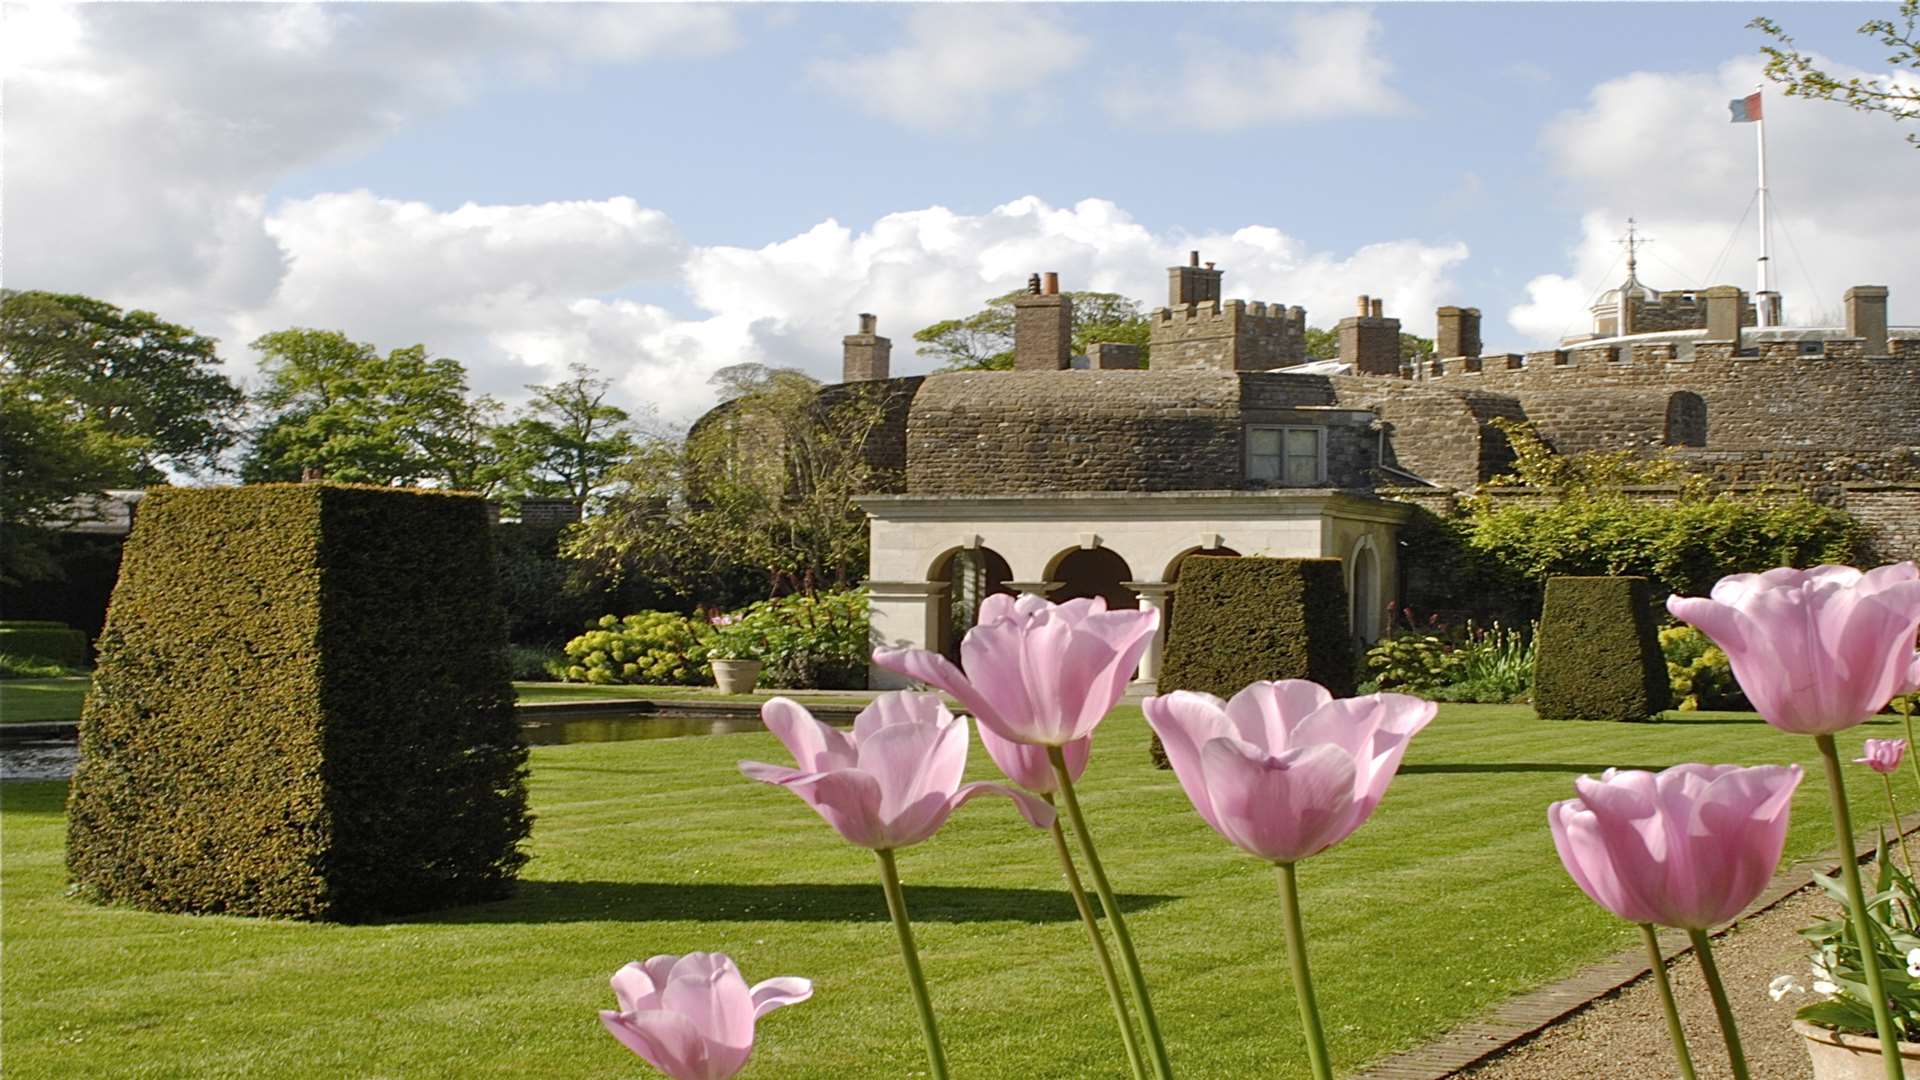 Last year's winning picture by Colin Varrall - Walmer Castle in the spring